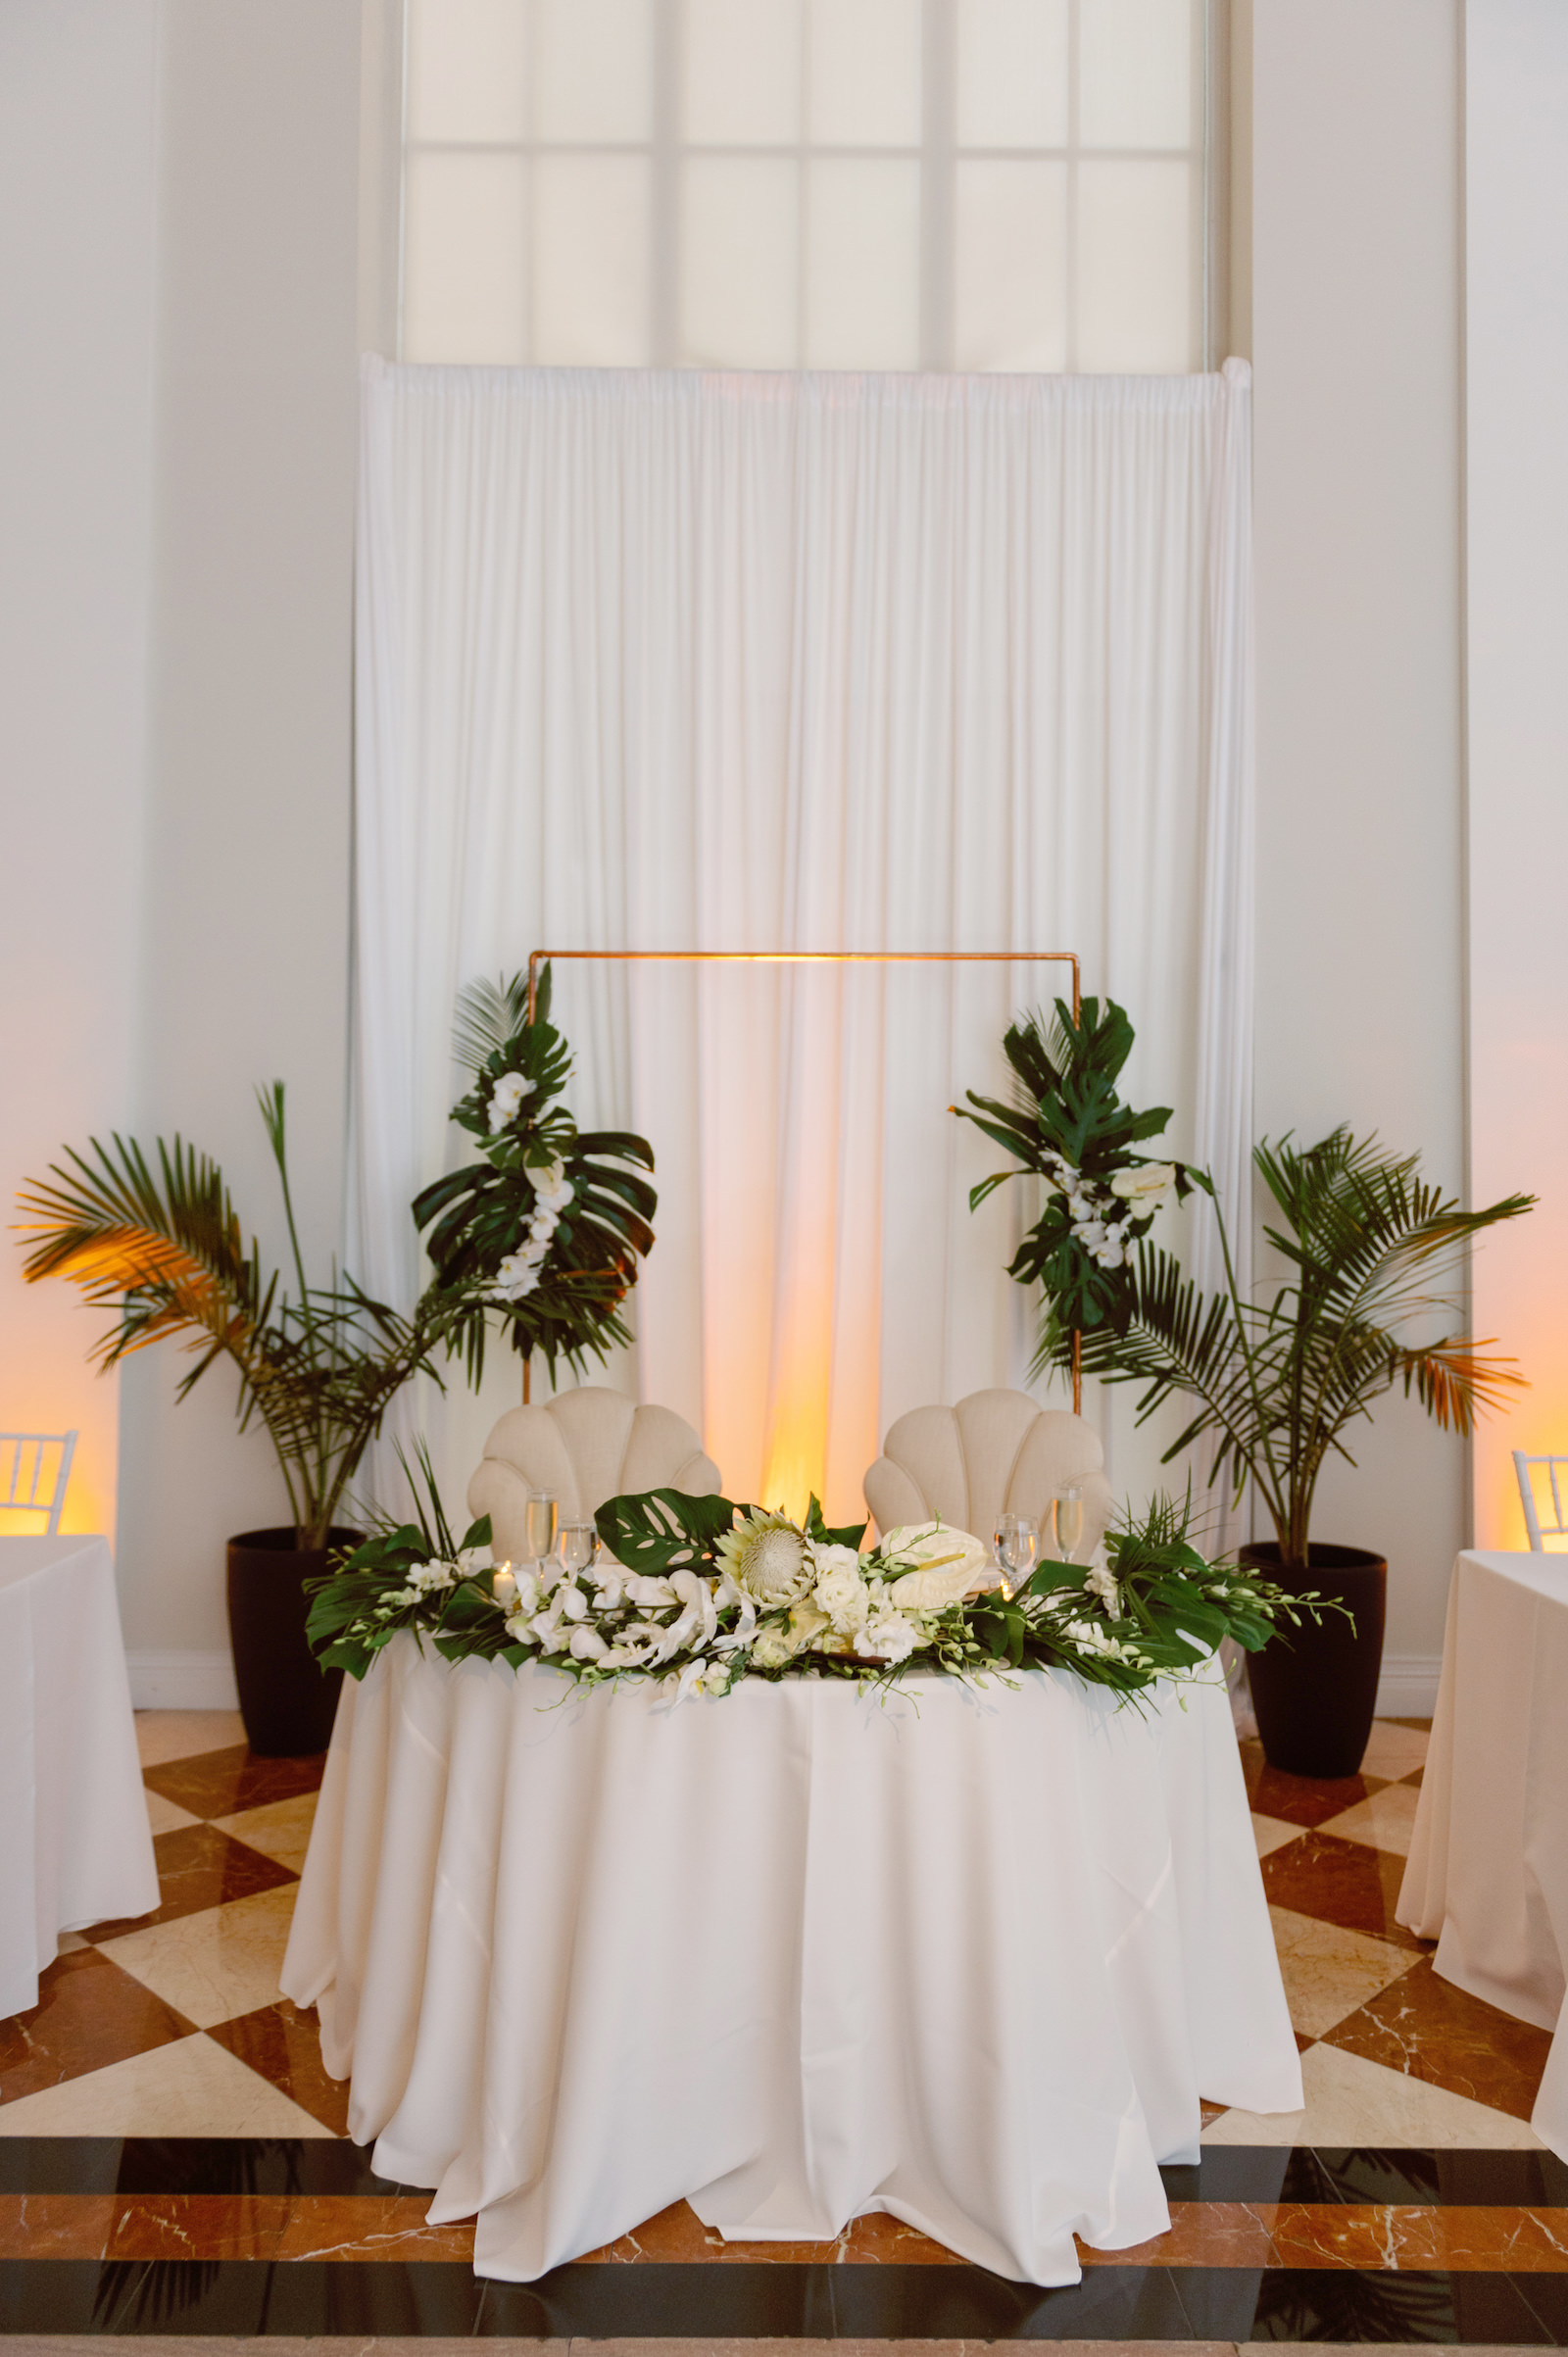 White and Green Modern Minimalist Tropical Wedding Reception Decor, Sweetheart Table with Seashell Tufted Dining Chairs, Palm Fronds, Monstera Leaves, White King Protea, Roses, Orchids, Anthurium Floral Arrangements, Planted Palm Fronds in Pots, Gold Arch, Linen Draping Backdrop | Tampa Bay Wedding Planner Taylored Affairs | Downtown Tampa Wedding Venue The Vault